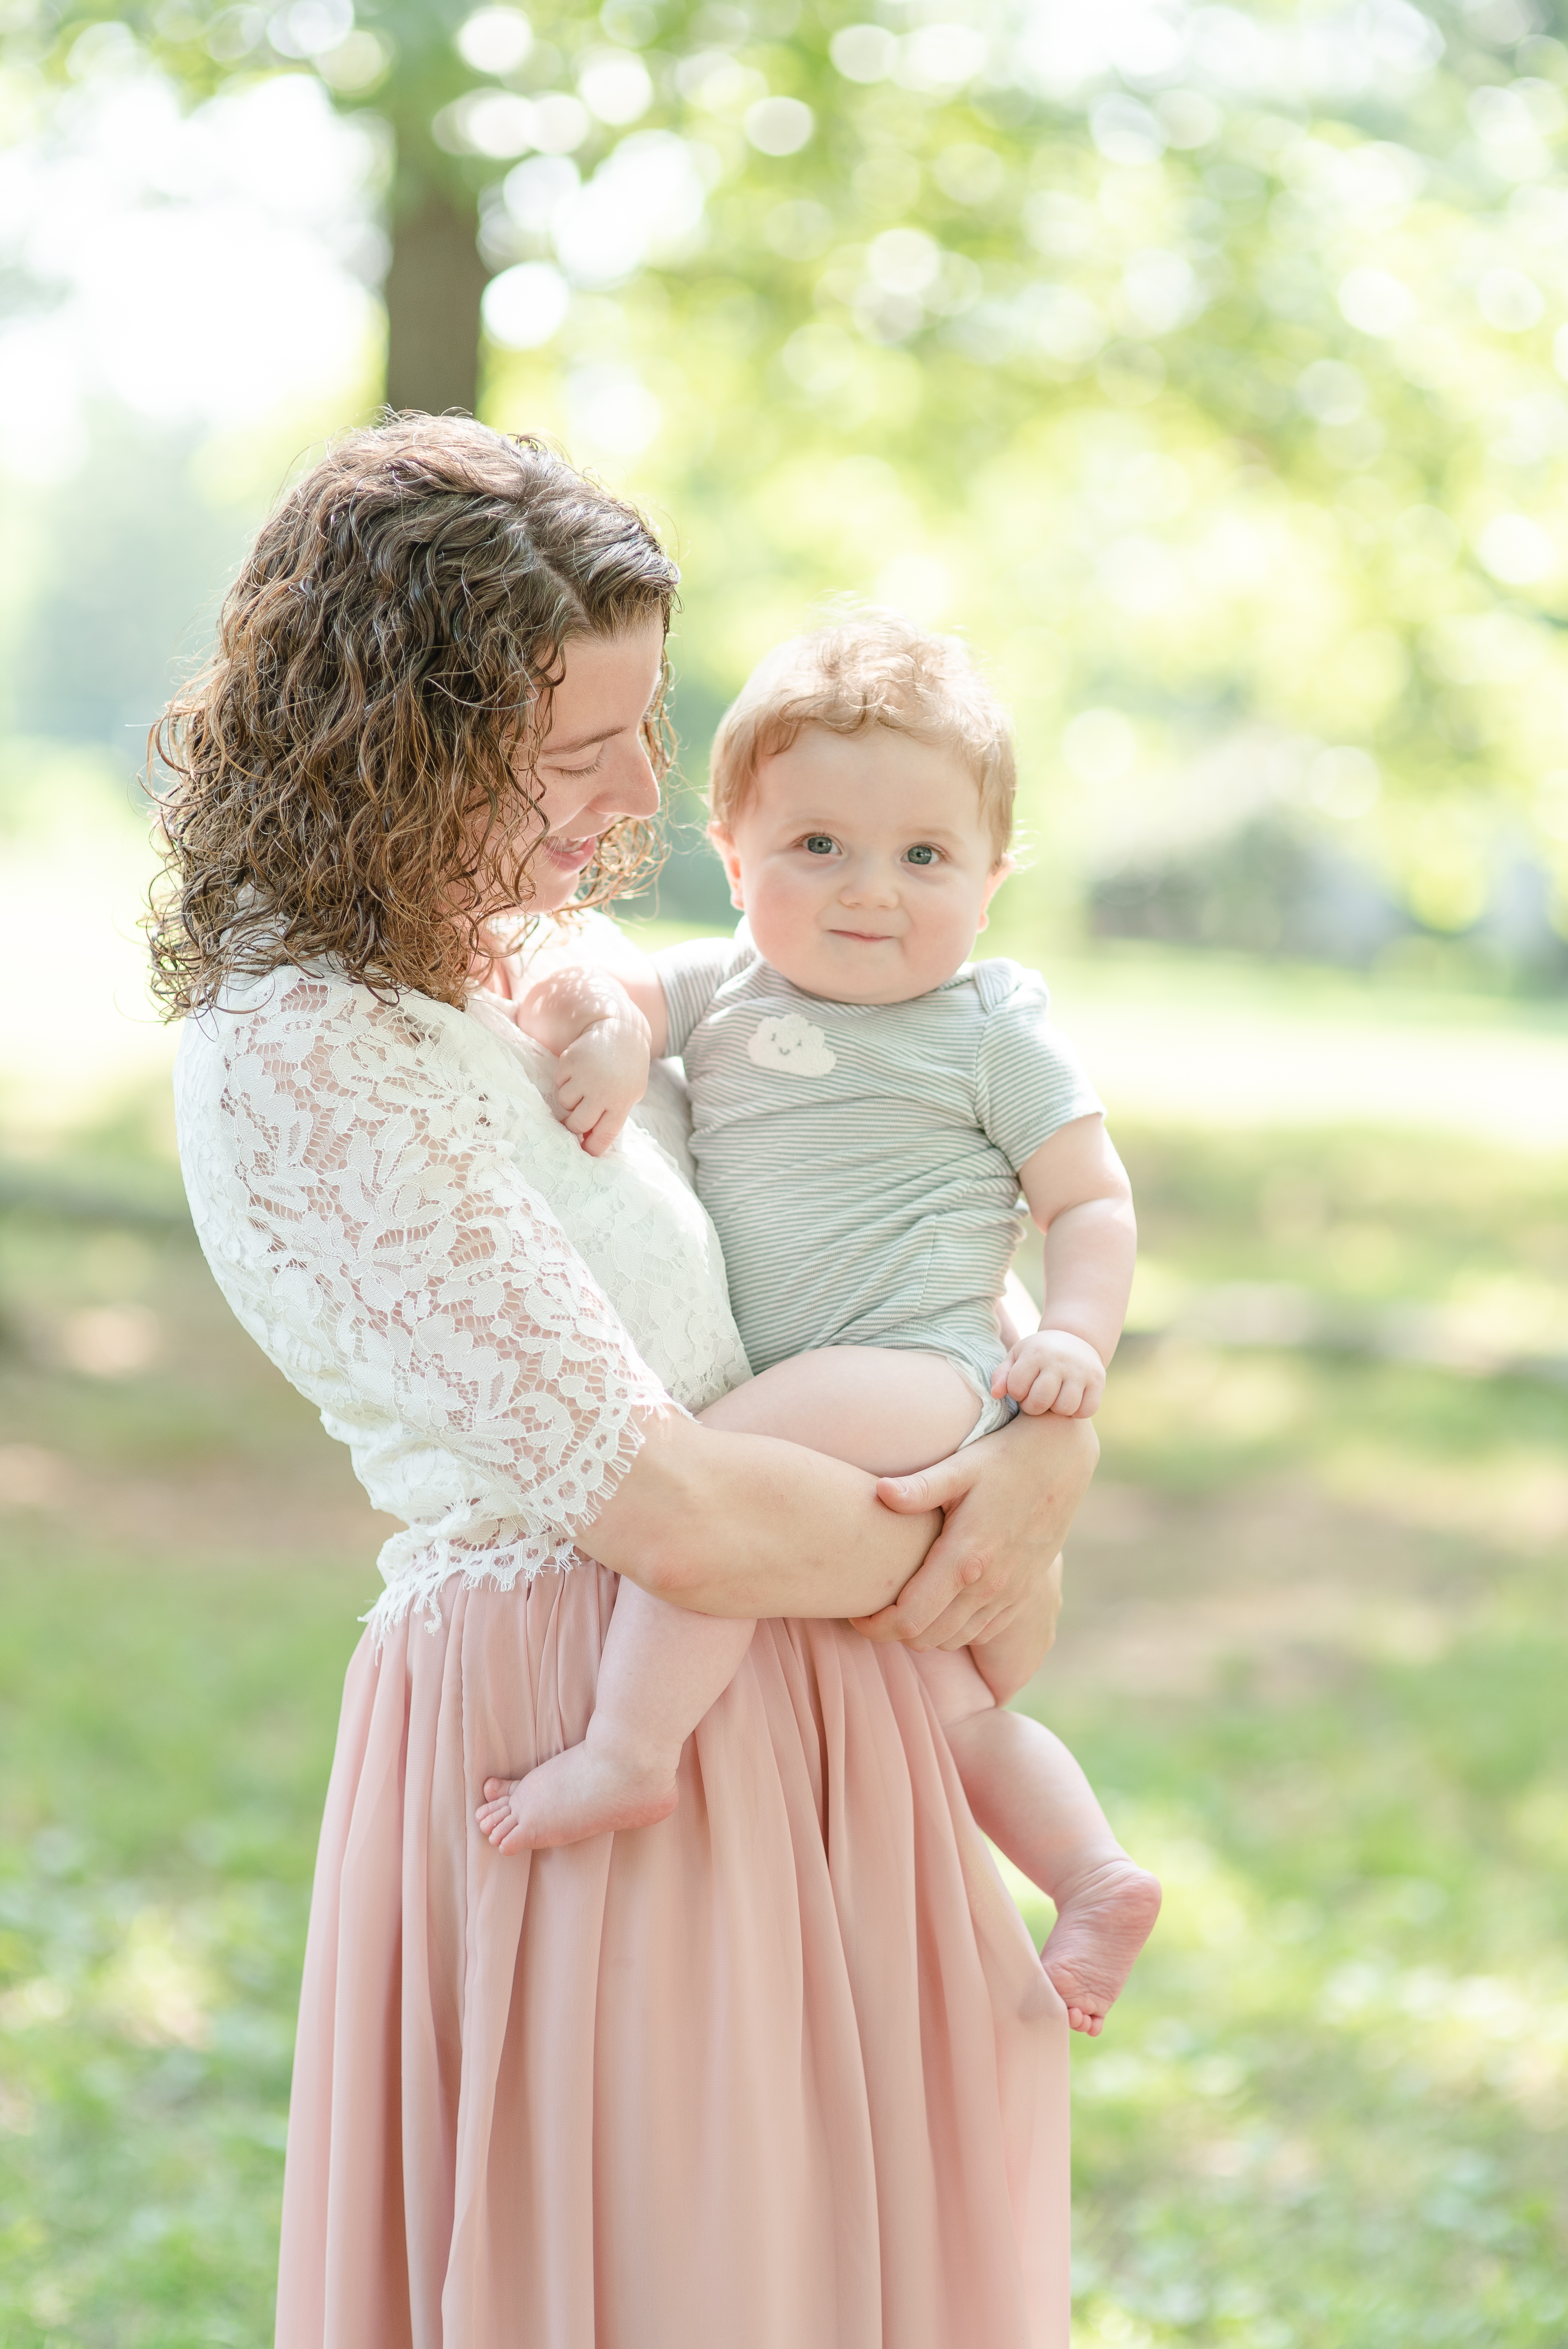 Dolly DeLong Photography LLC Mommy and Me Session in Nashville TN